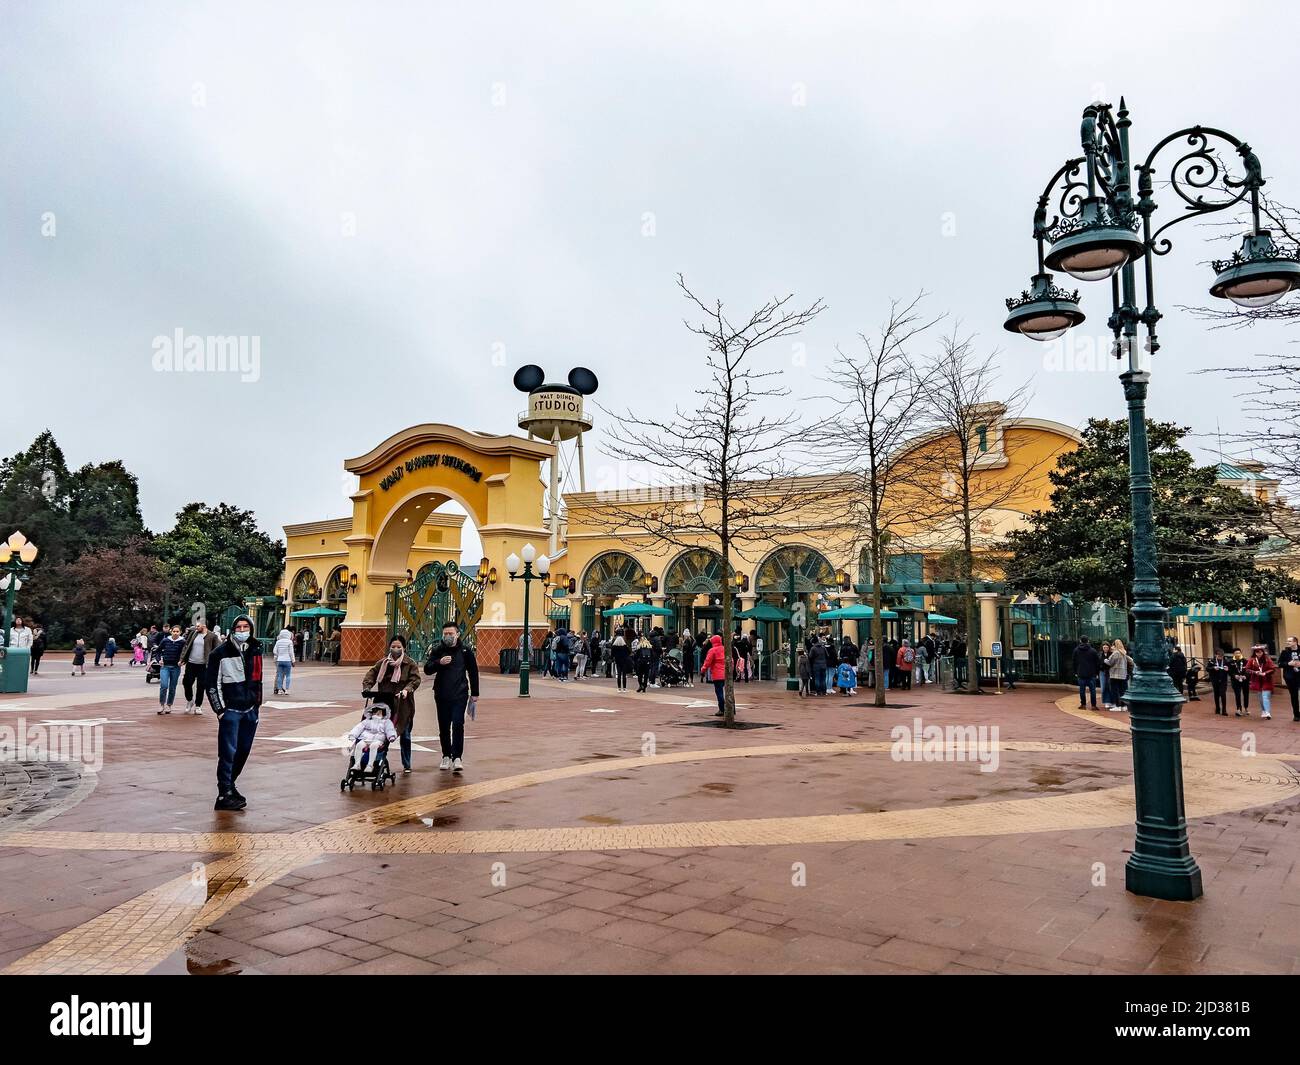 Paris, France - 04/05/2022: Water tower and entrance archway to Walt Disney Studios in Disneyland Paris. Cloudy weather. People walking to the gate. Stock Photo